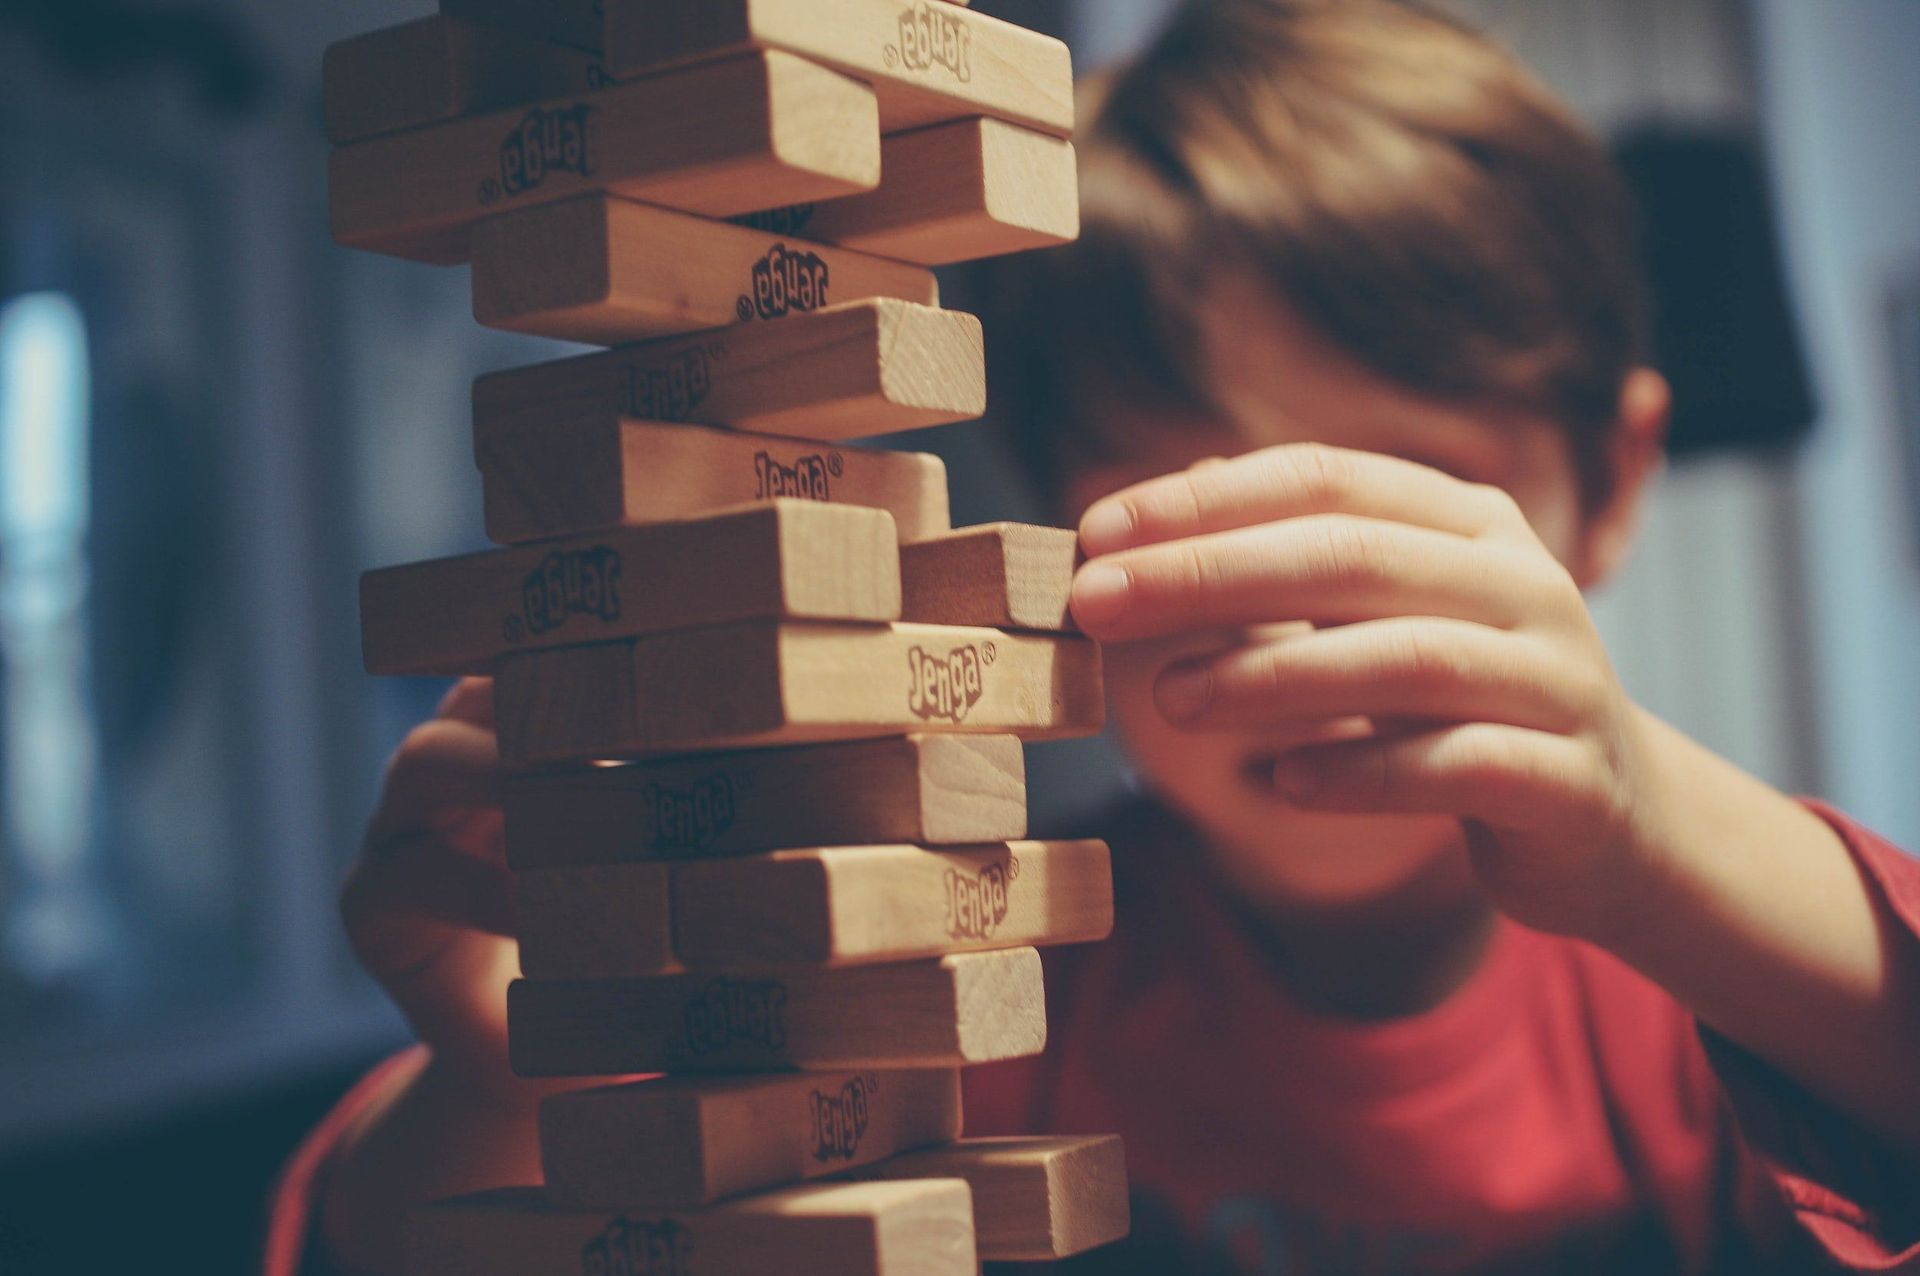 A young boy is playing a game of jenga with wooden blocks.